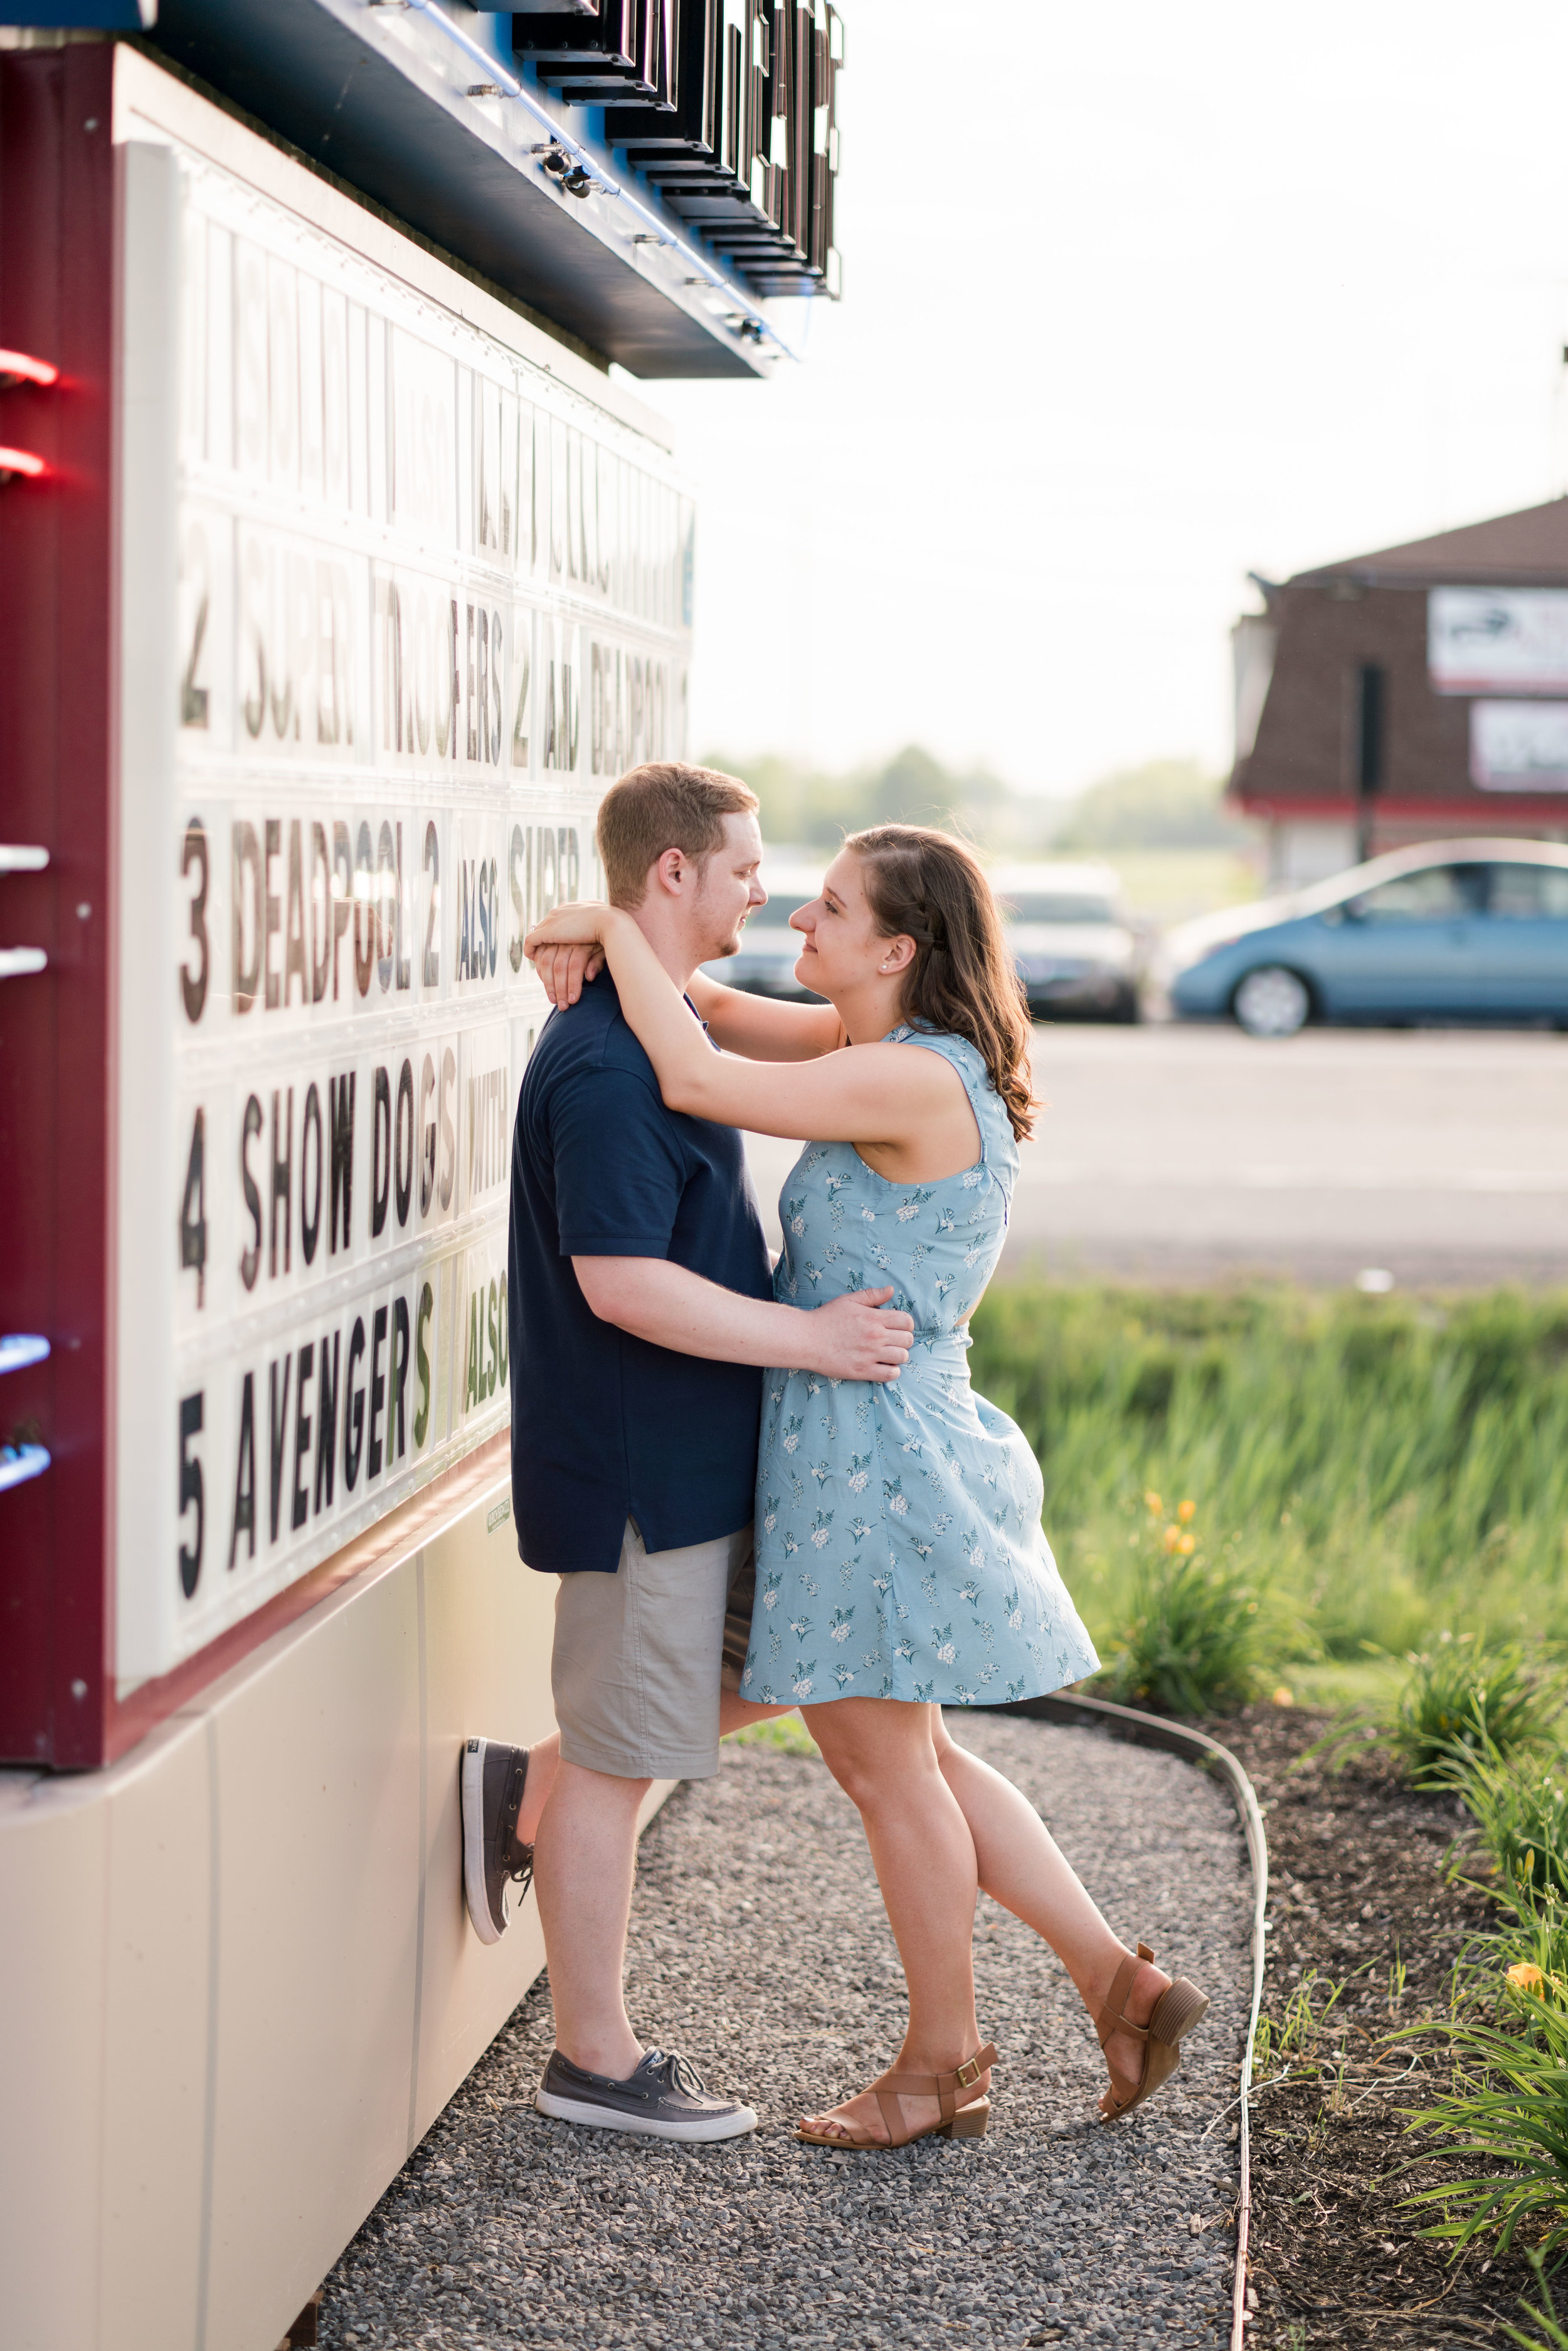 Katie and Ryan Engagement Session at Transit Drive In by Stefan Ludwig Photography-34.jpg